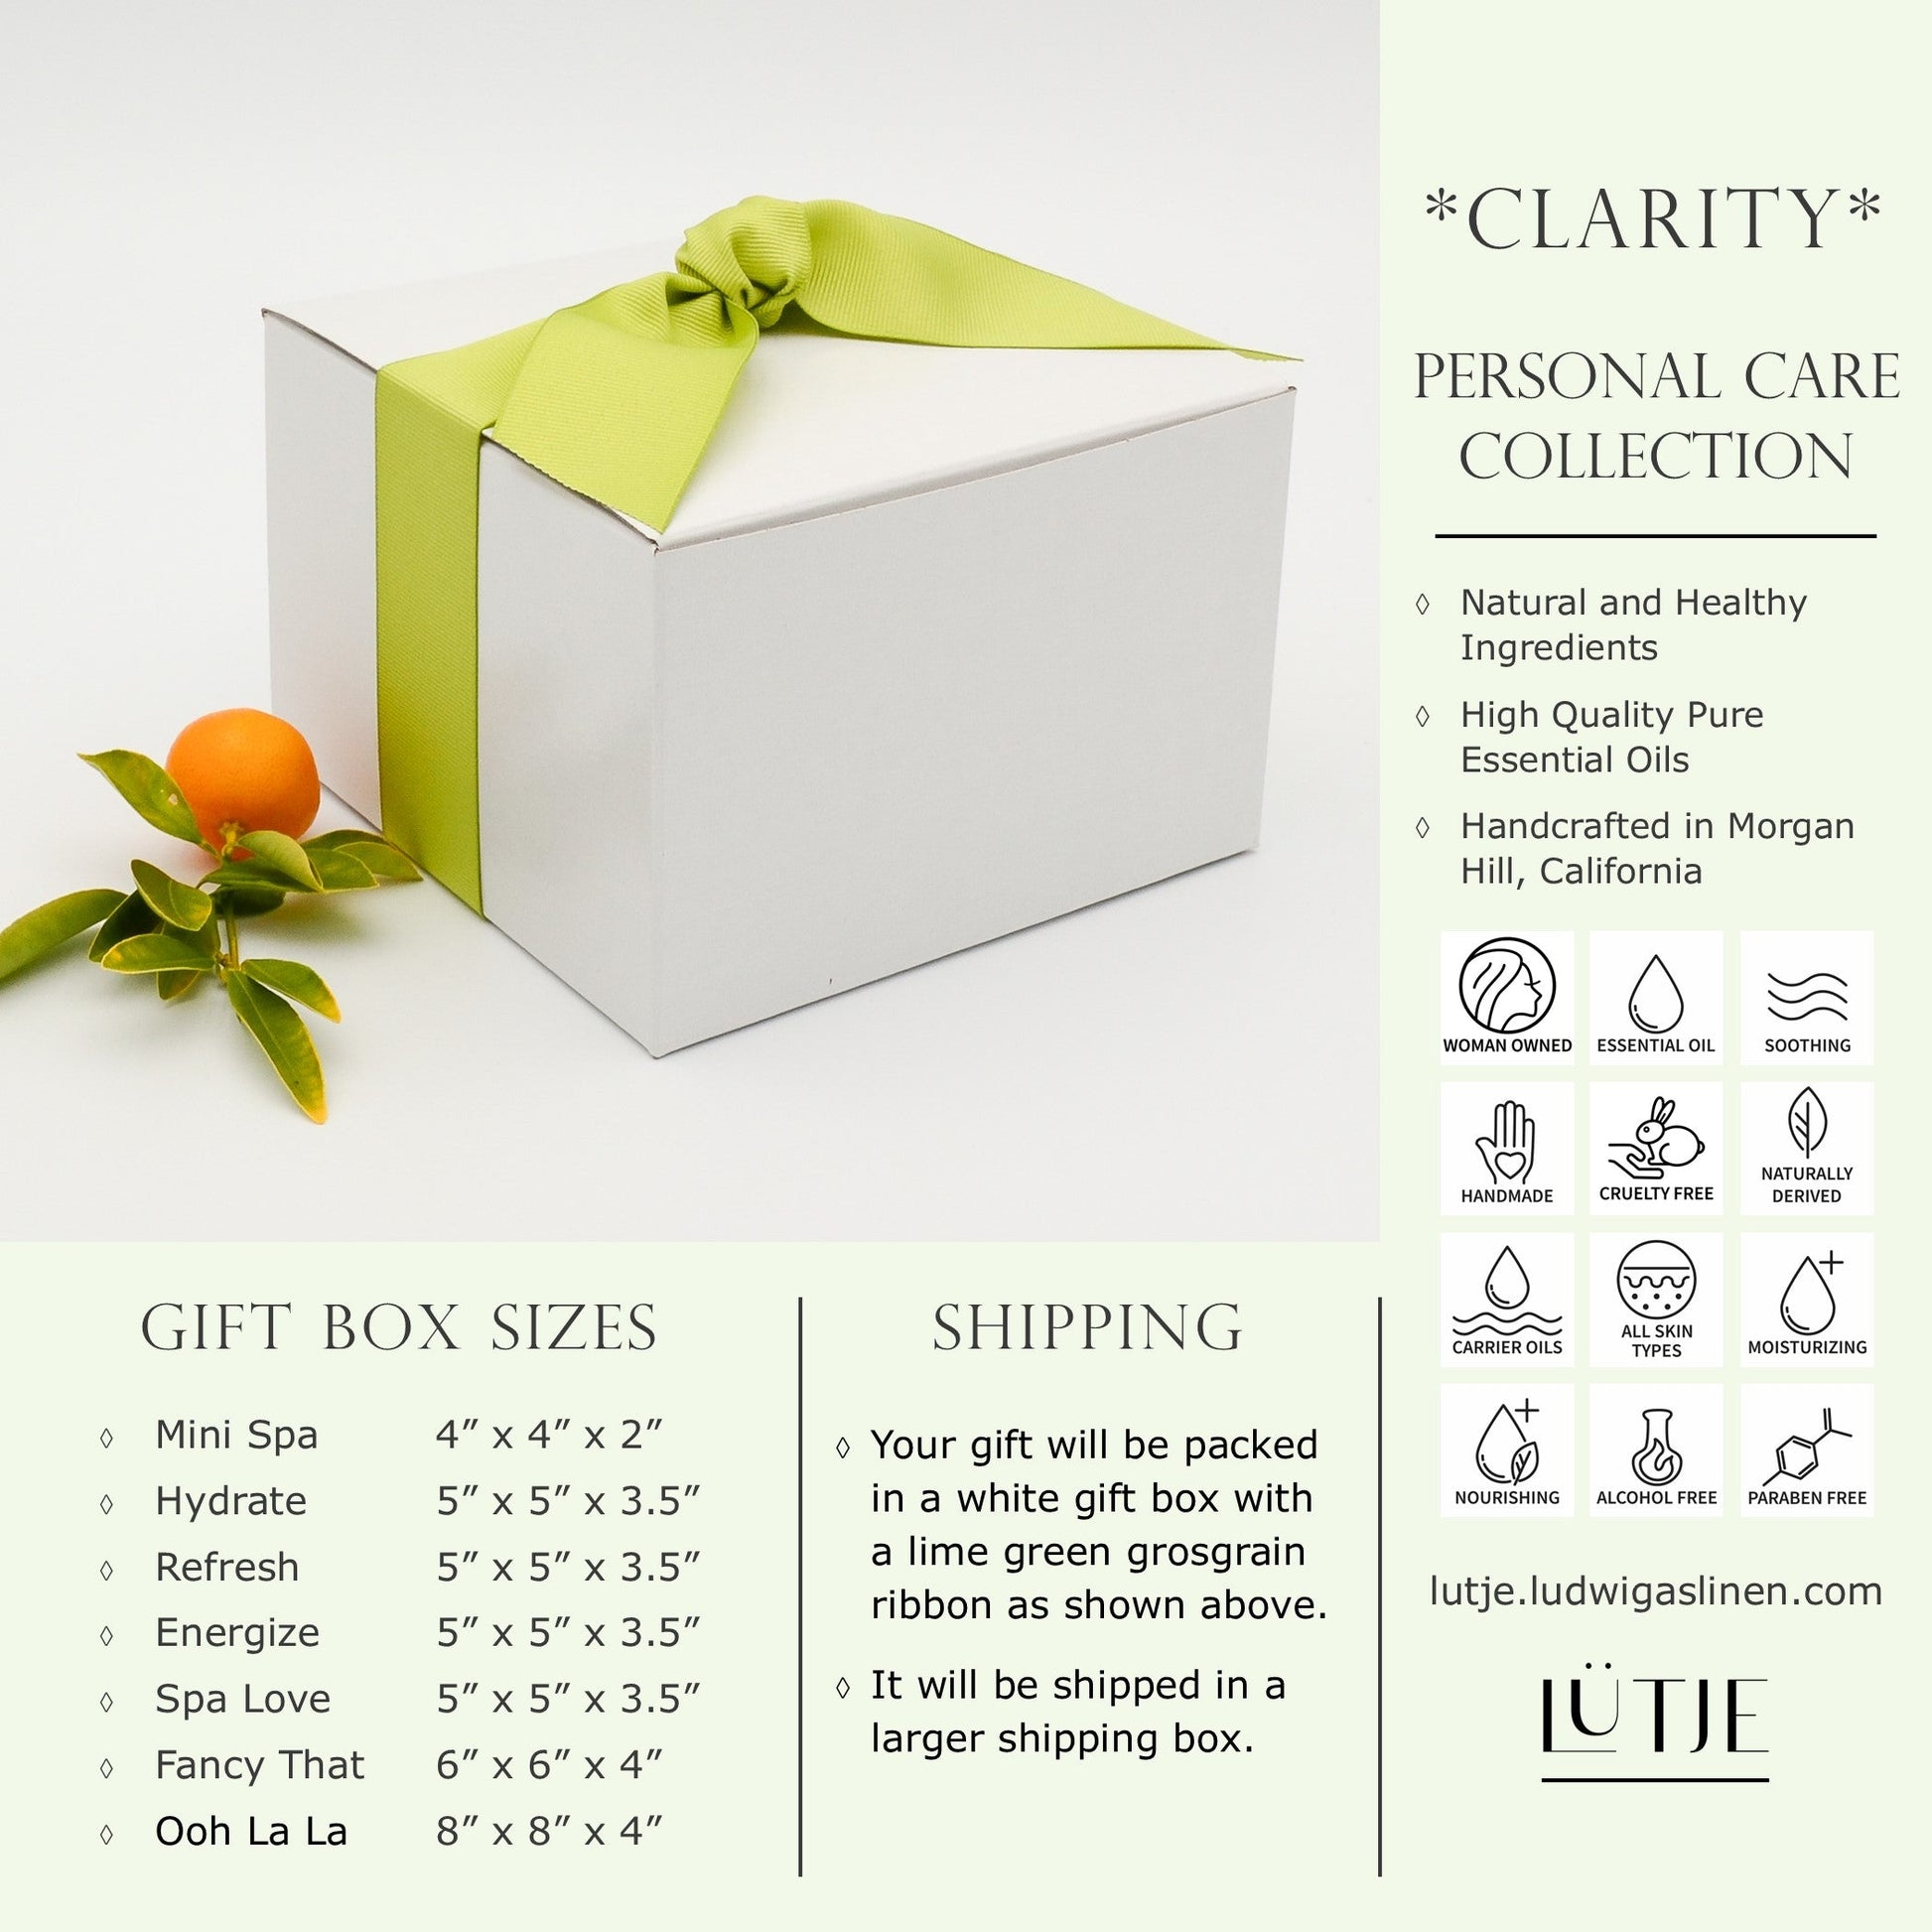 Gift Box for women Bergamot & Black Pepper Arise Collection shipping and general information including made with natural and healthy ingredients,woman owned, handmade, cruelty free, naturally derived, pure essential oils, all skin types, moisturizing, soothing, nourishing, alcohol free and paraben free. 